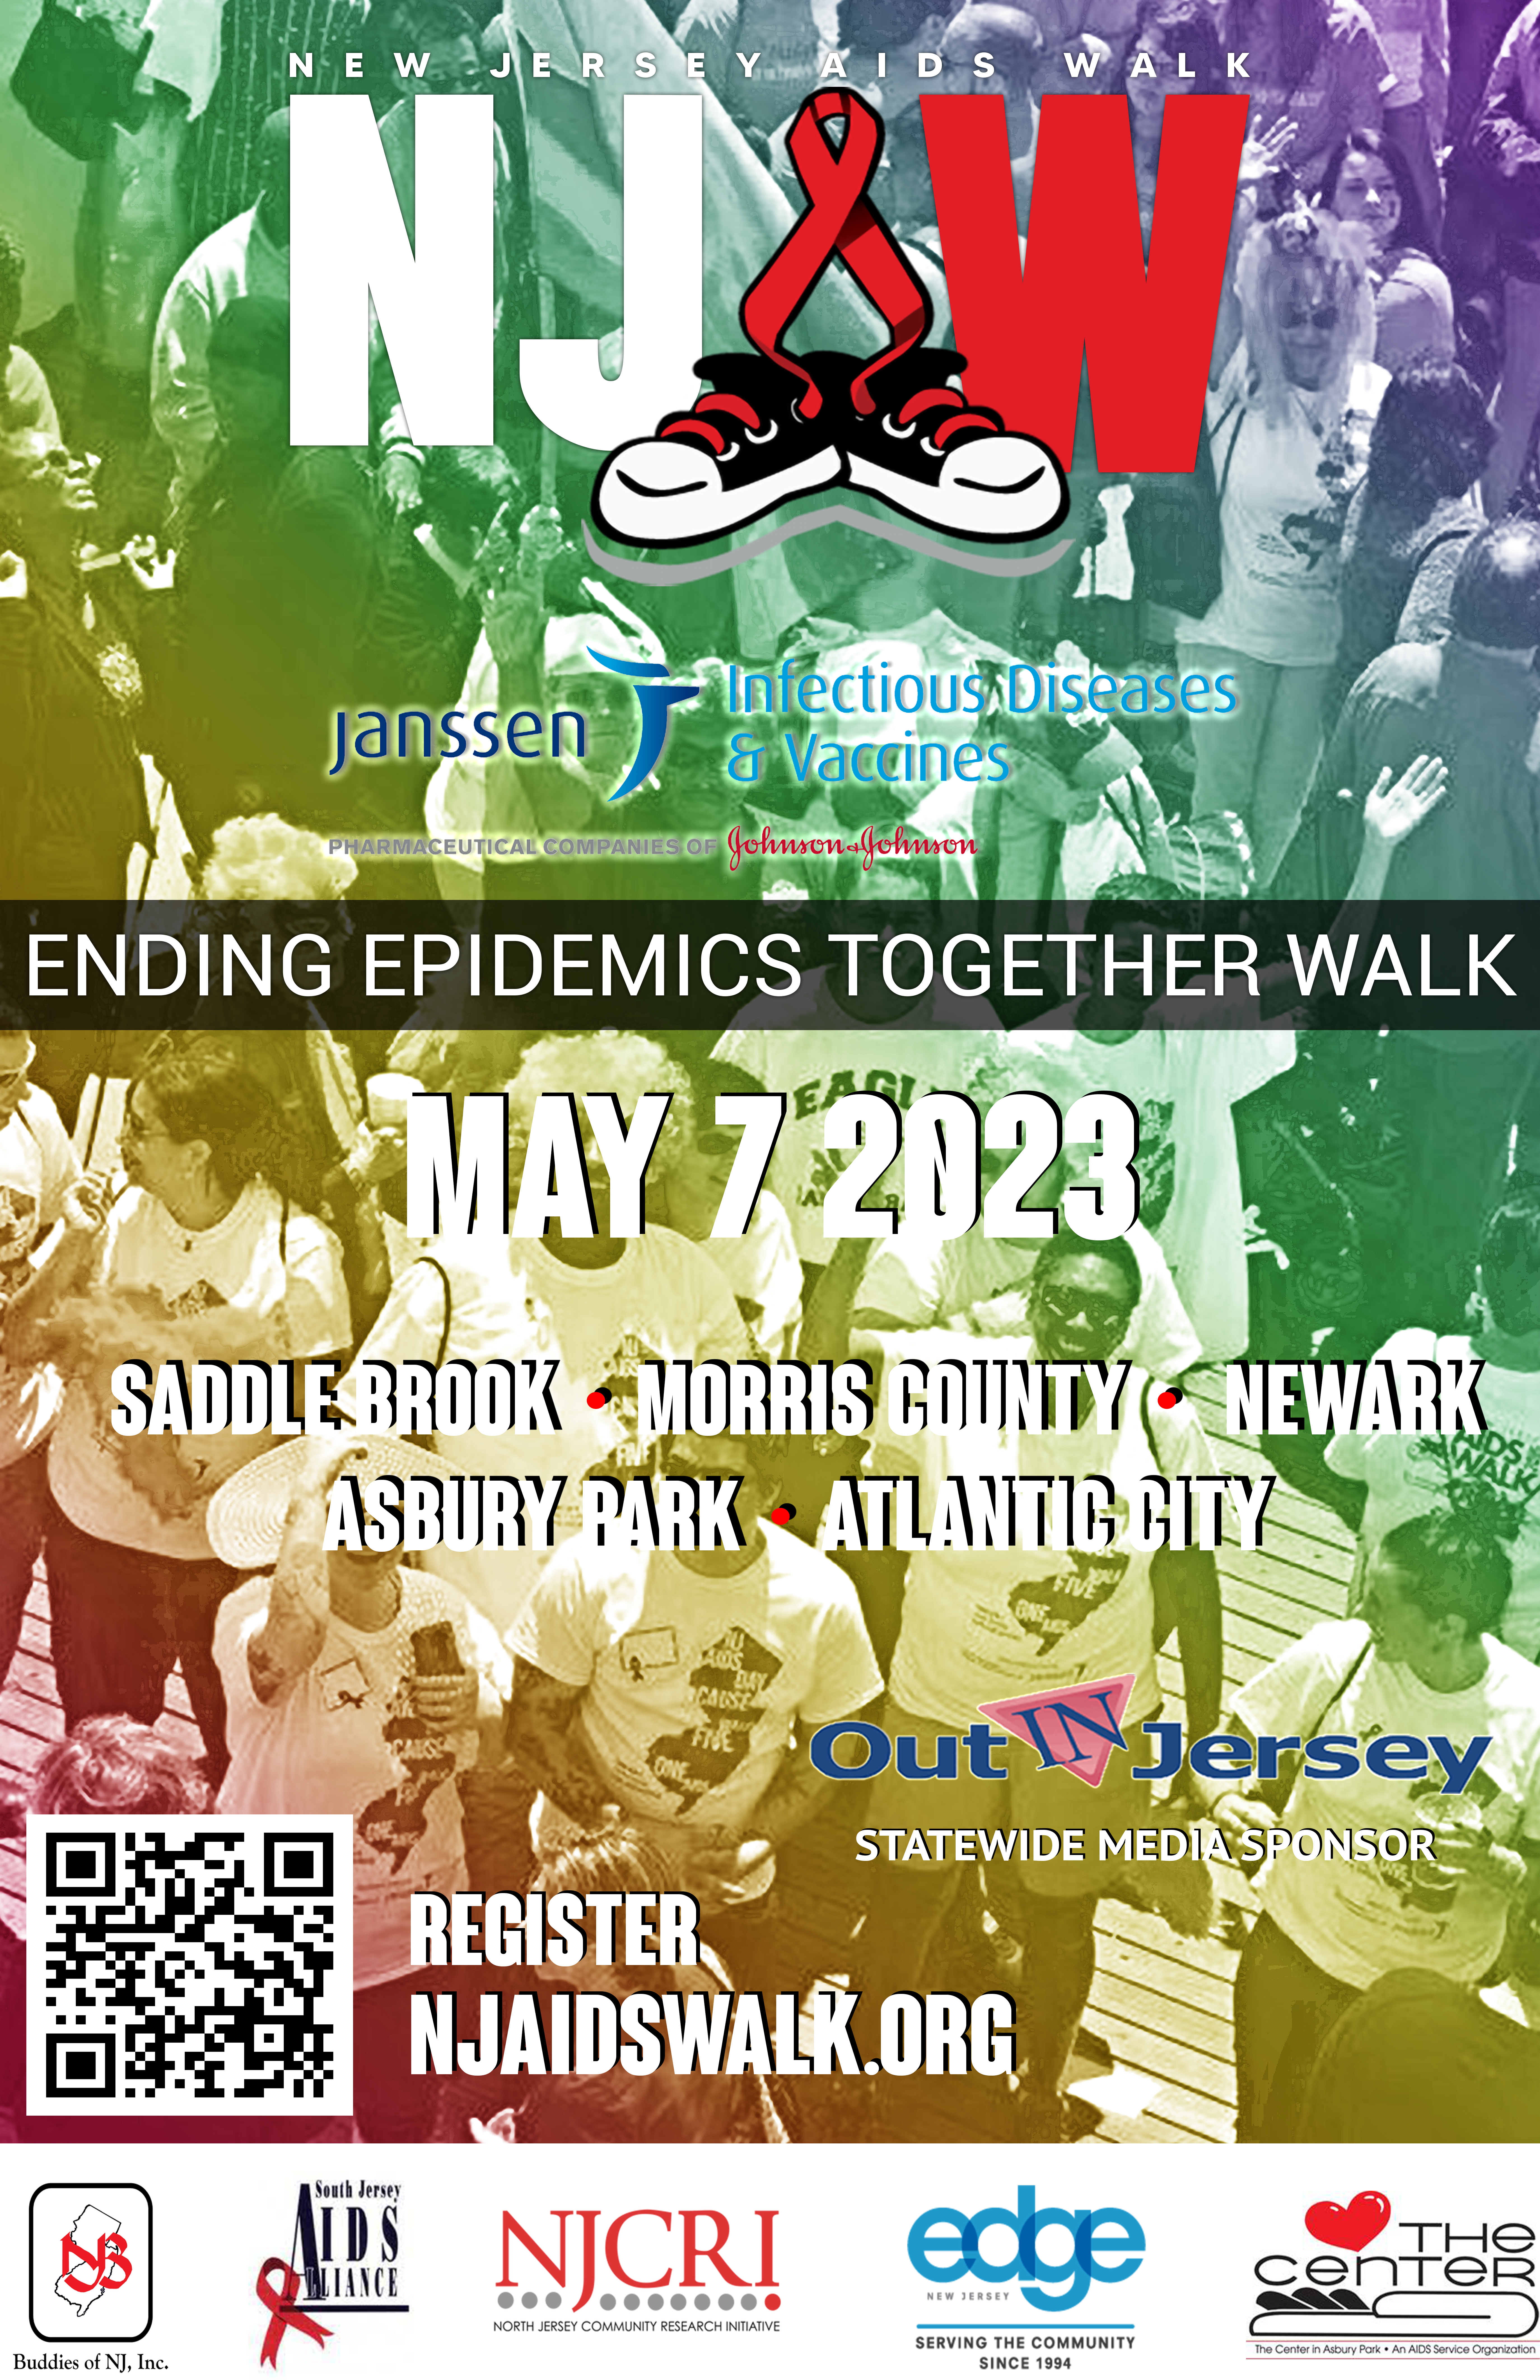 Posters I crafted for the 2023 New Jersey AIDS Walk.